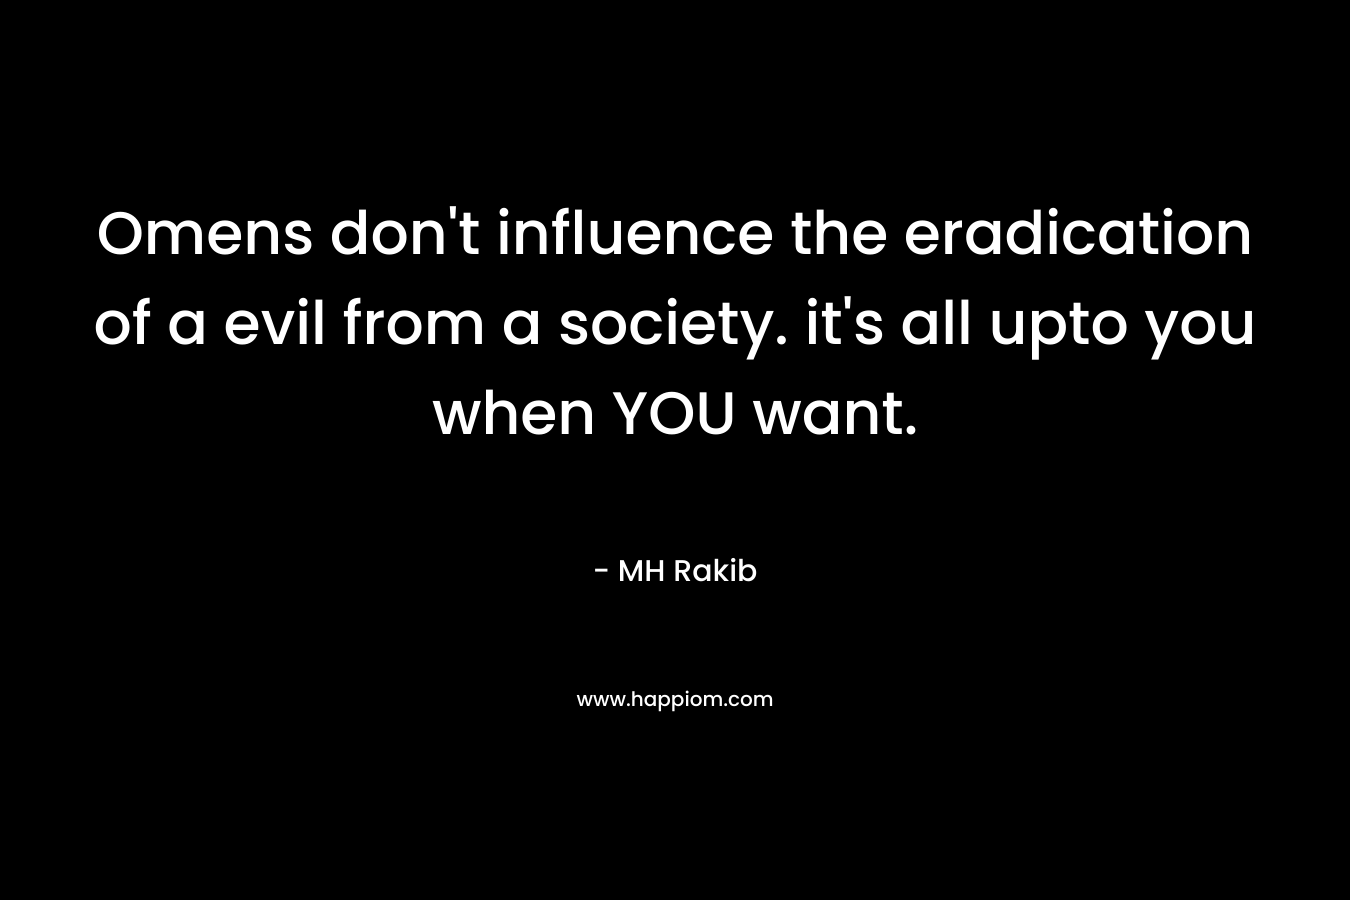 Omens don't influence the eradication of a evil from a society. it's all upto you when YOU want.